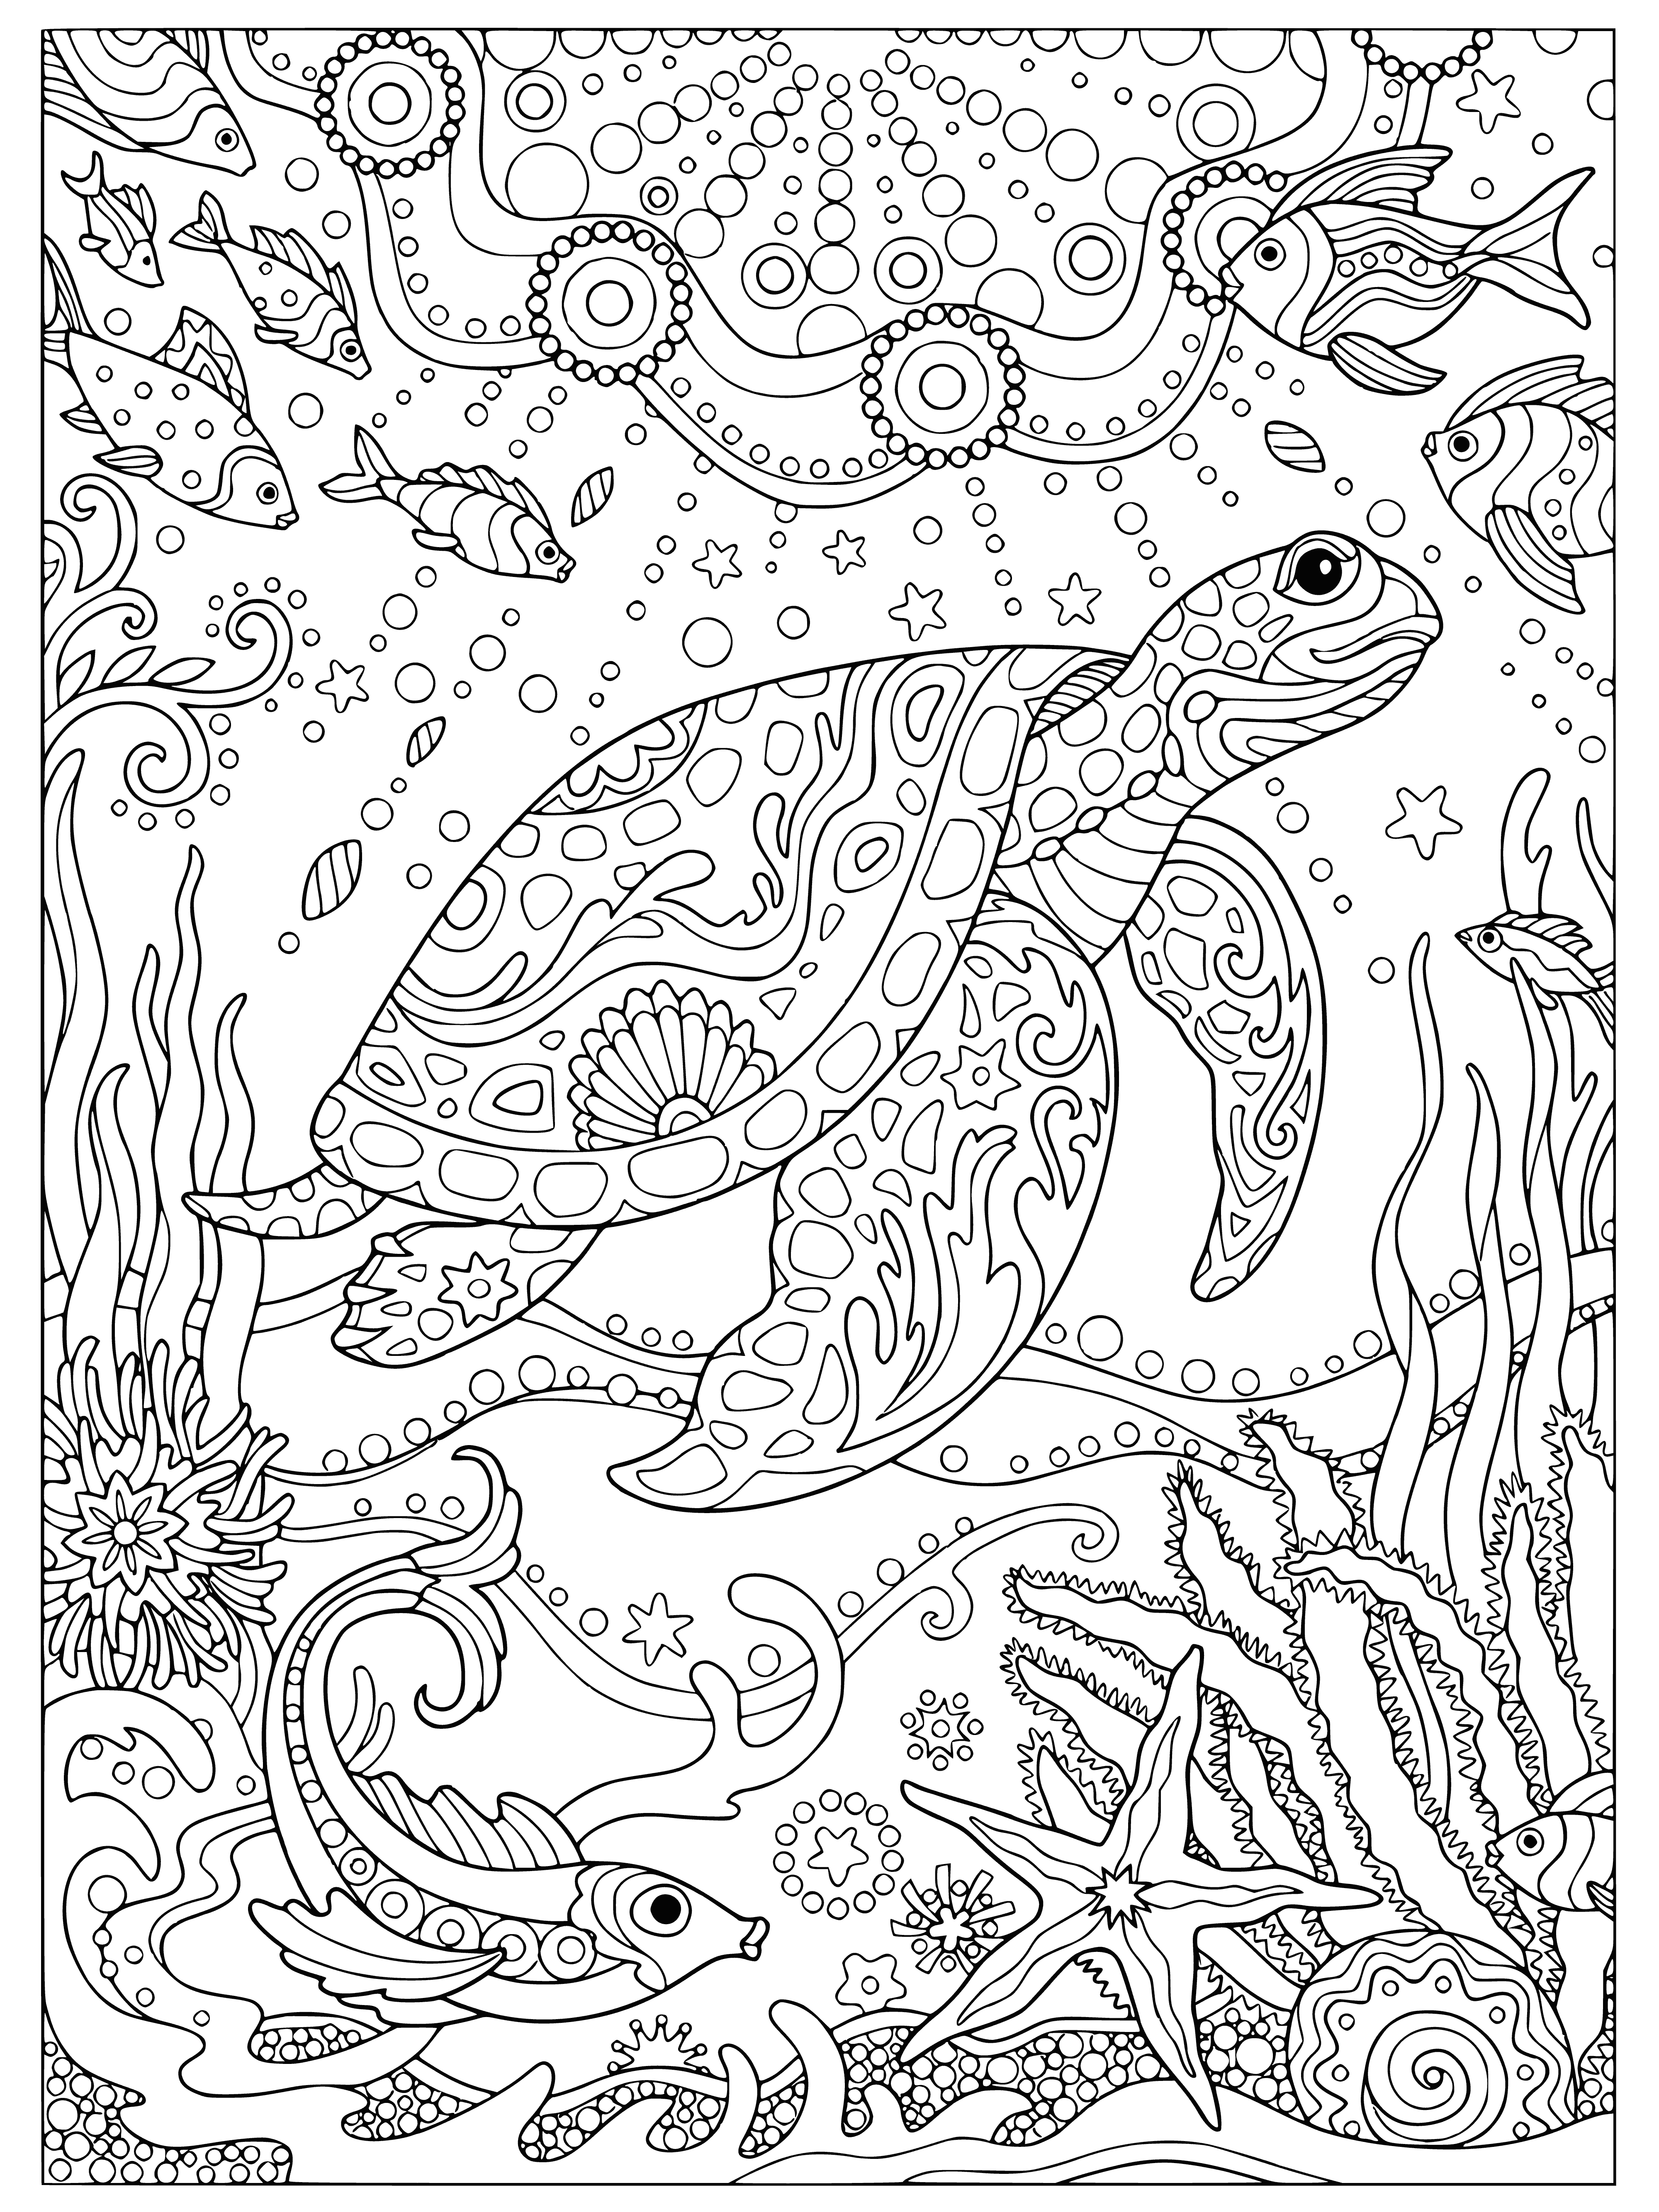 coloring page: Beautiful sea life coloring page featuring a large fish, 2 smaller fish, coral, and a sandy bottom. Perfect for an adult coloring book!